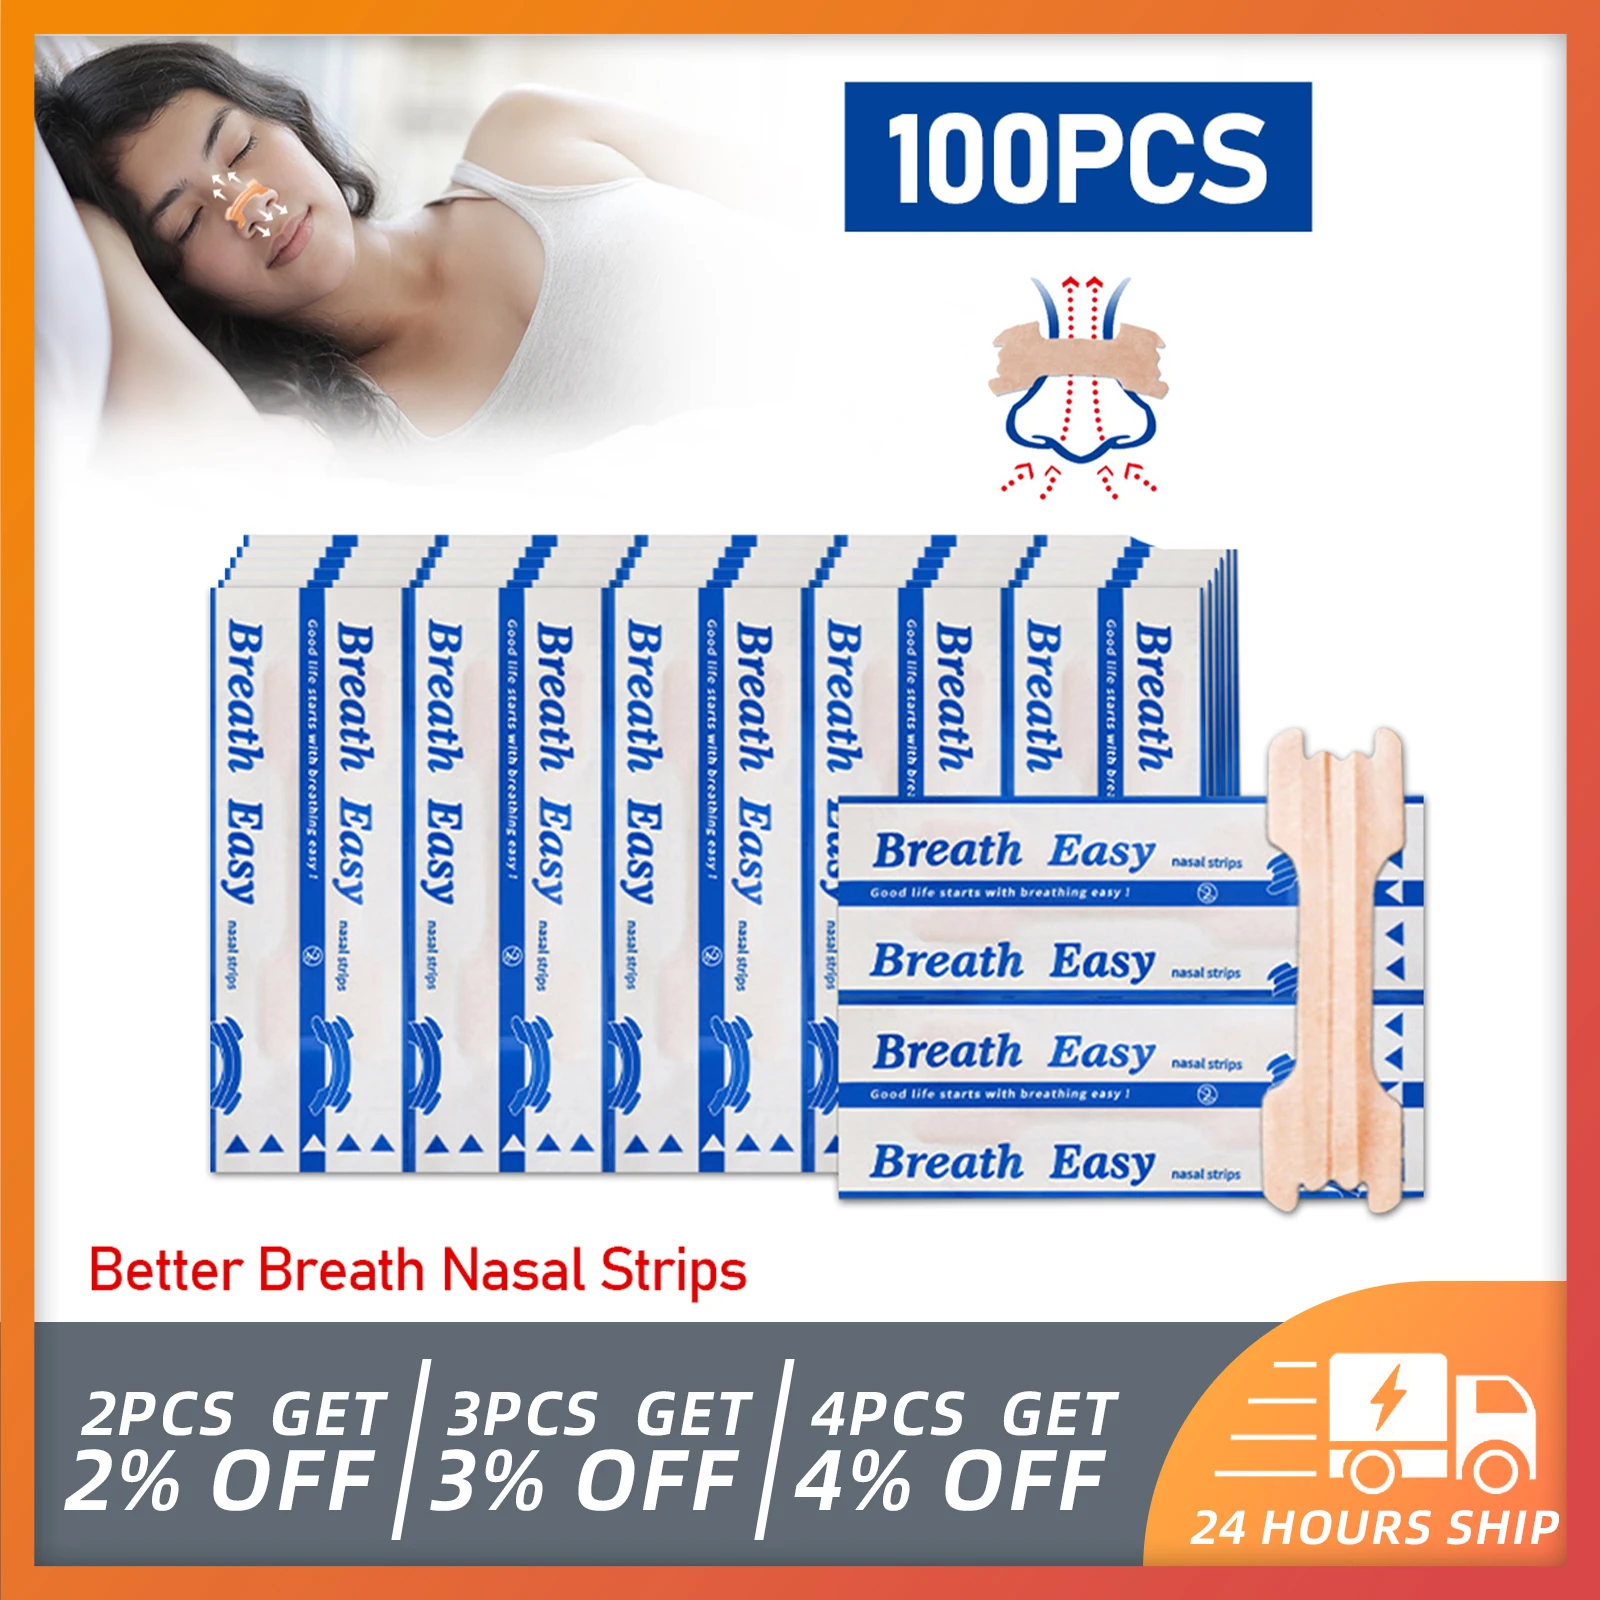 Aptoco 100PCS Breath Nasal Strips Right Aid Stop Snoring Nose Patch Good Sleeping Patch Product Easier Better Breathe HealthCare